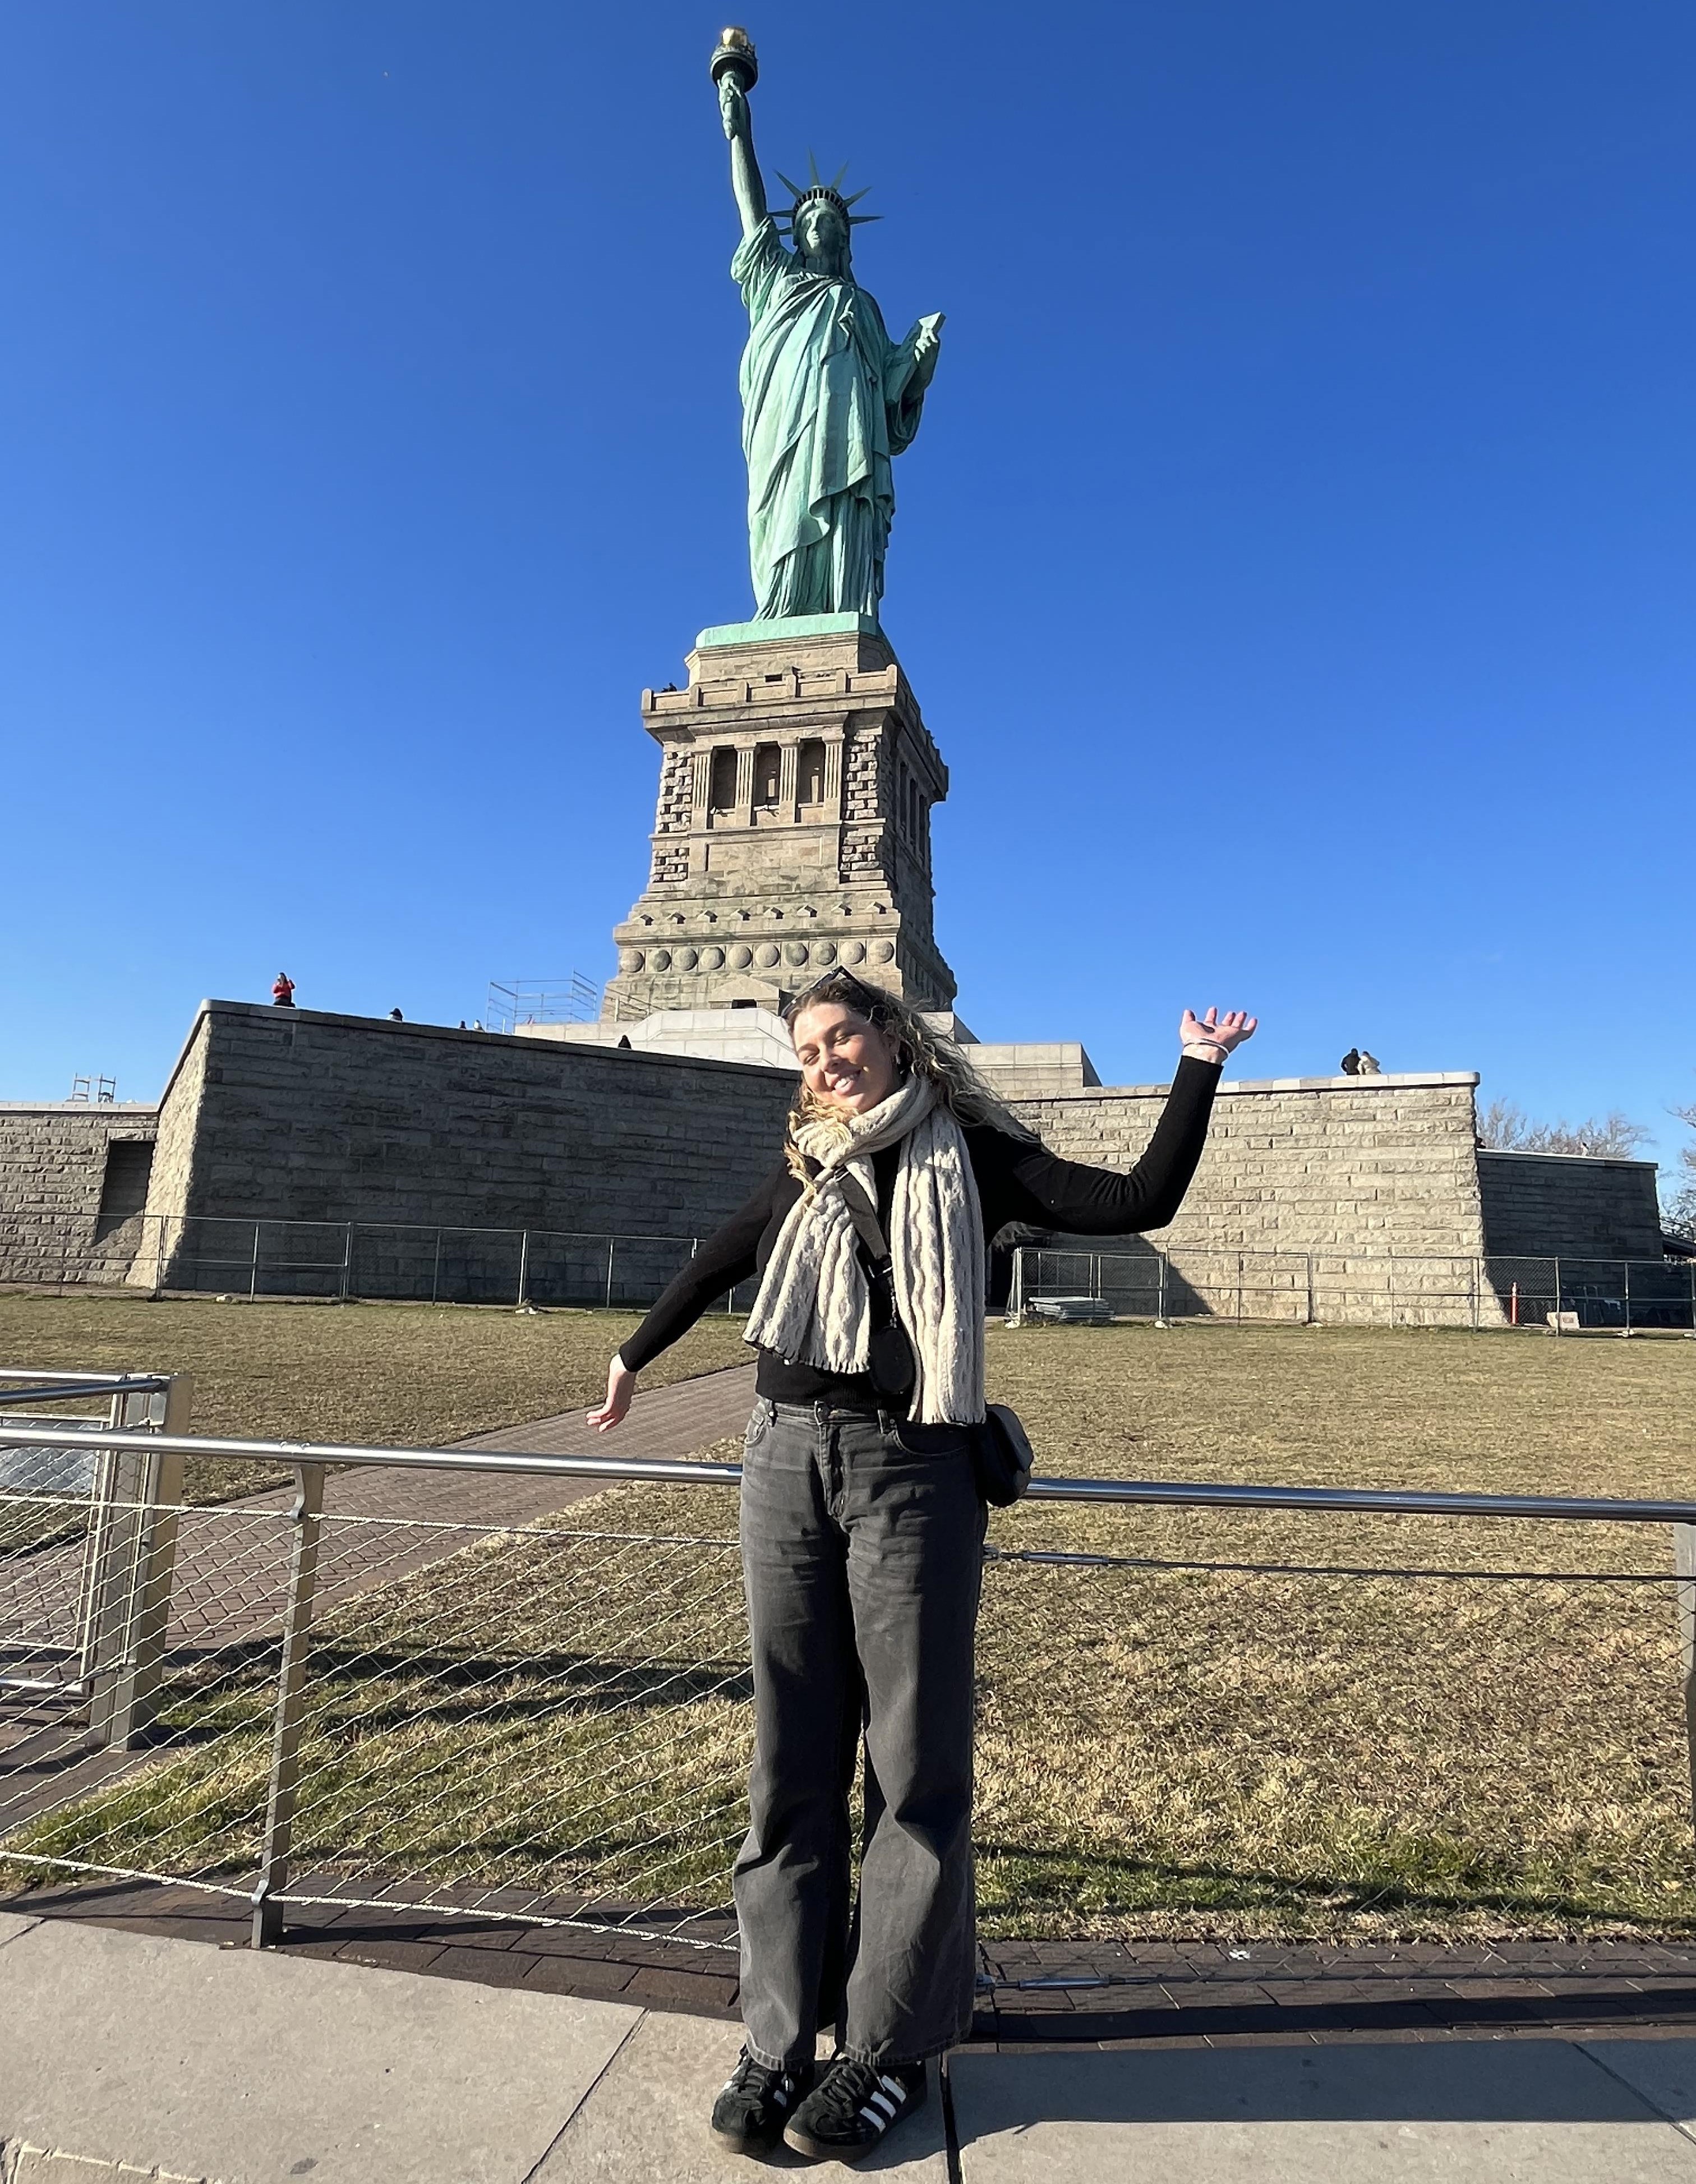 Student in front of Statue of Liberty